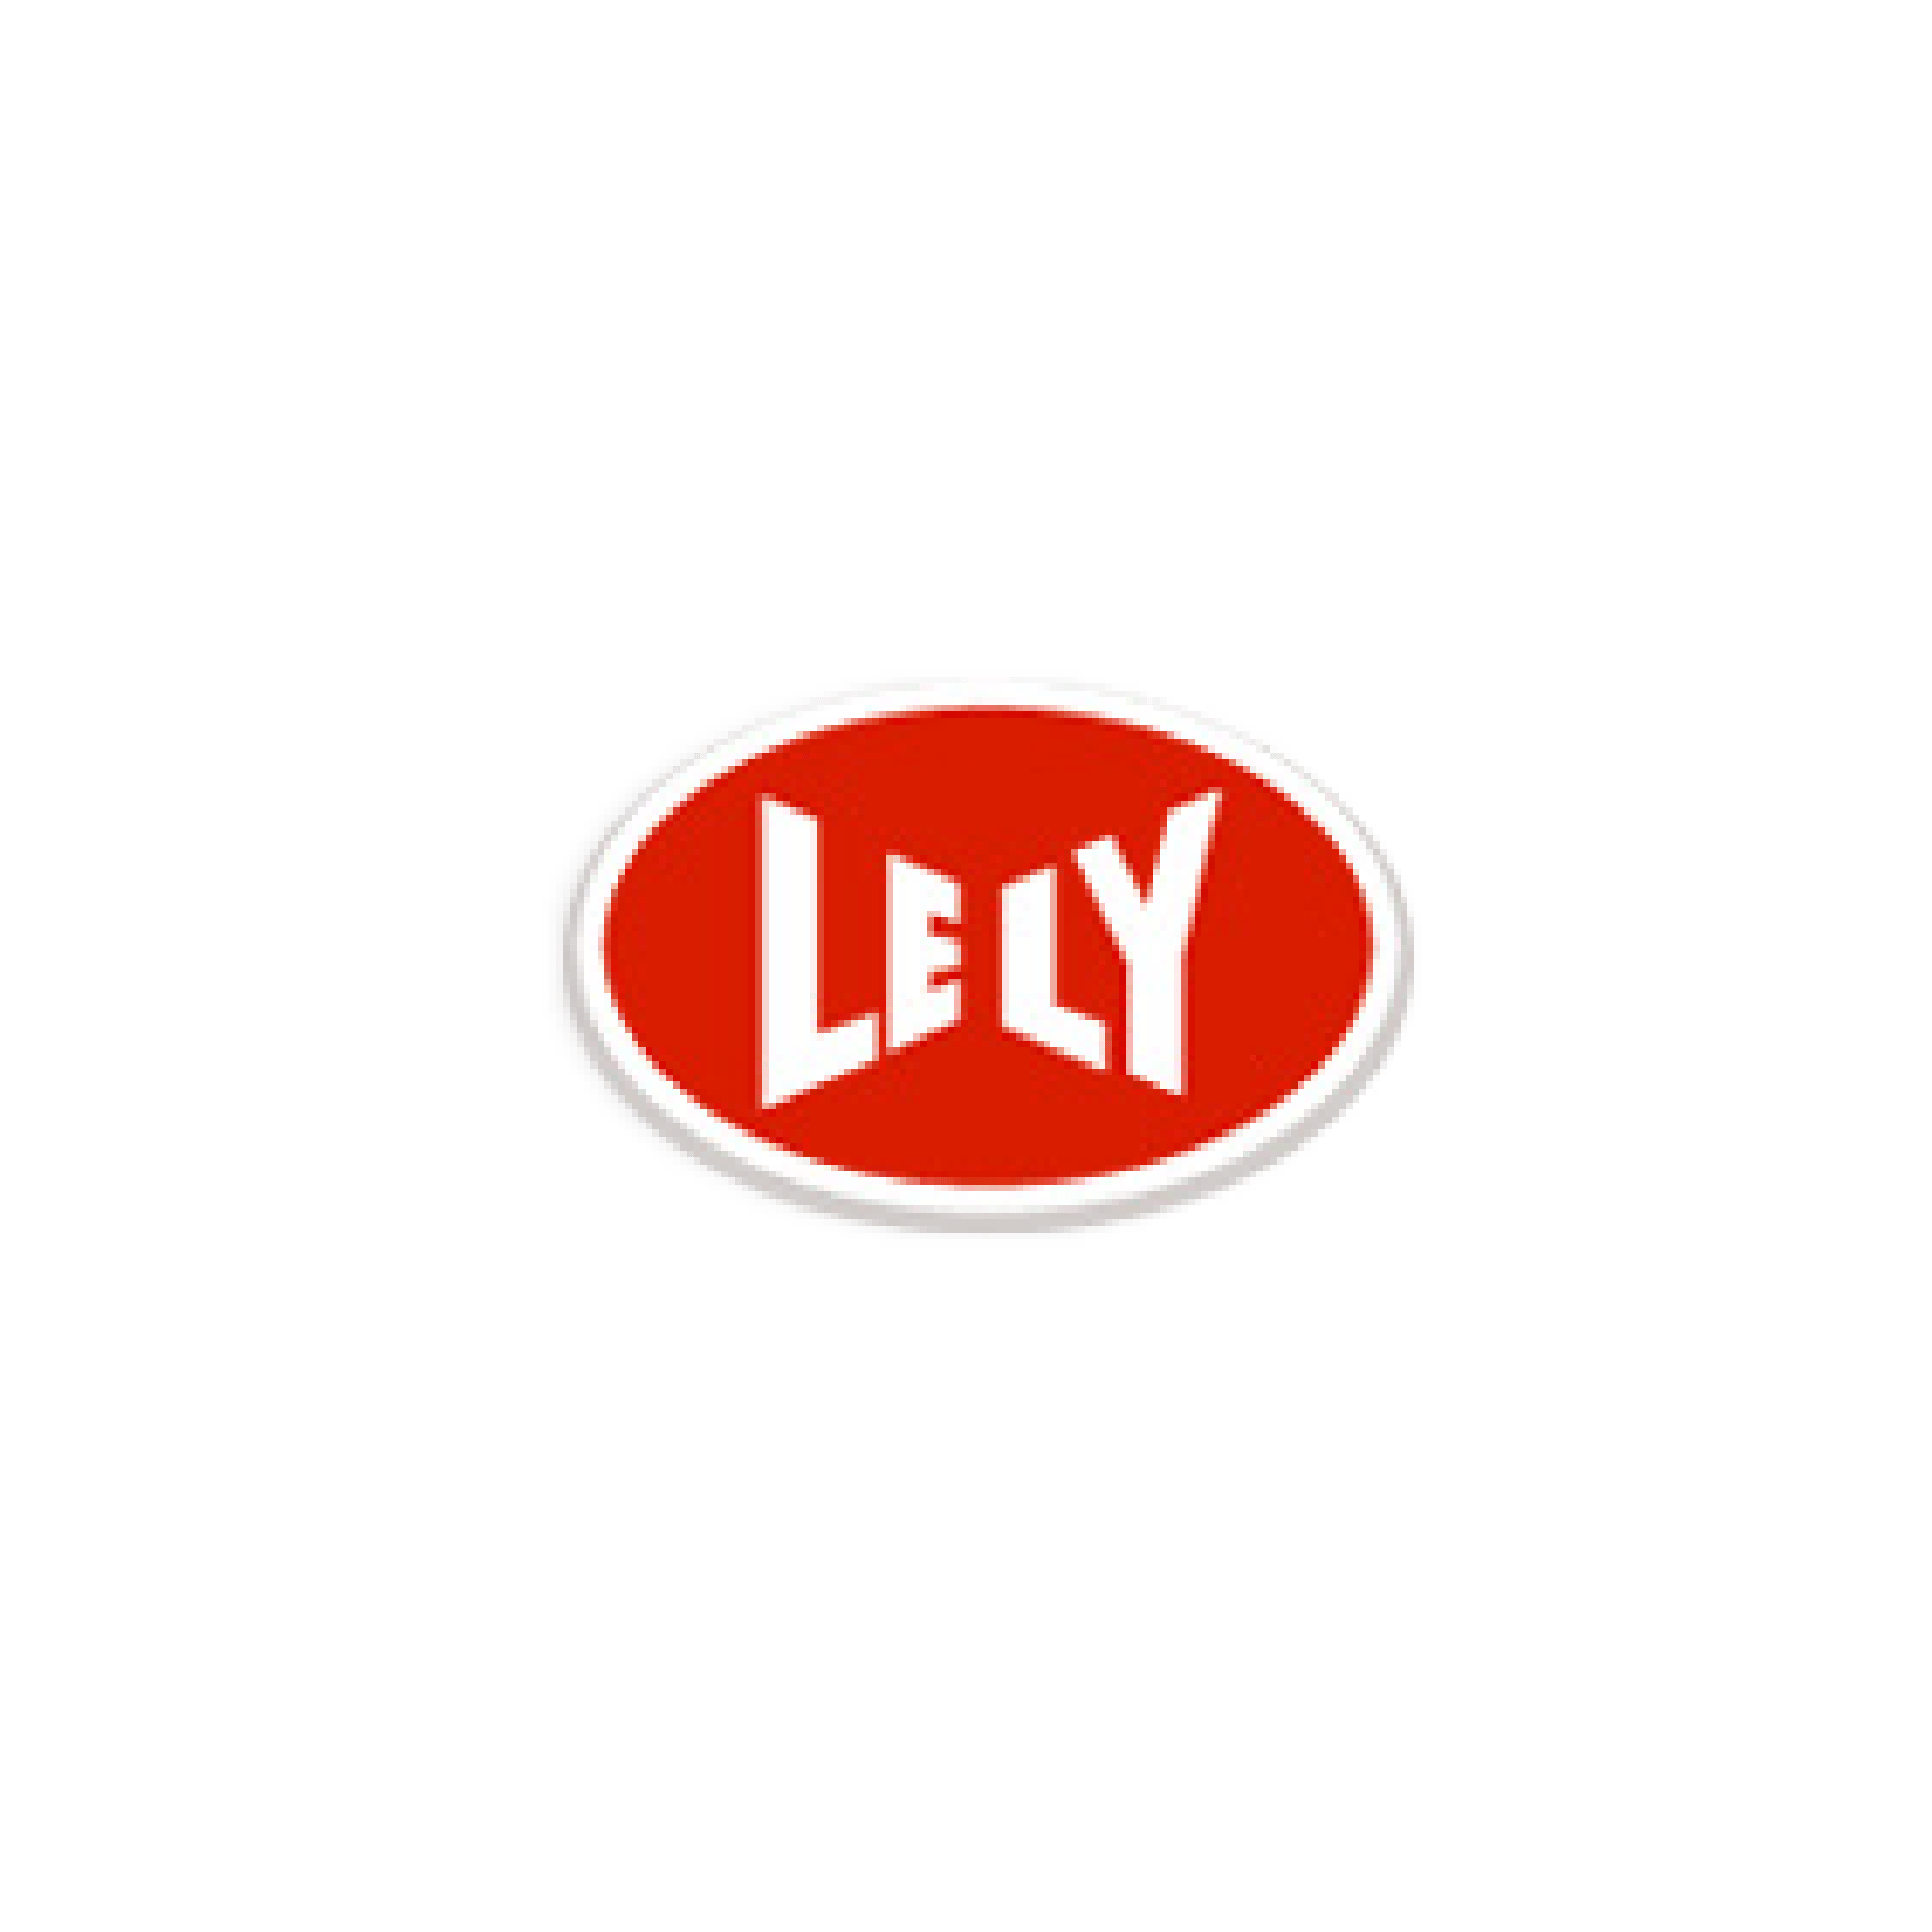 Lely Logo - Our customers, retailers & wholesailers